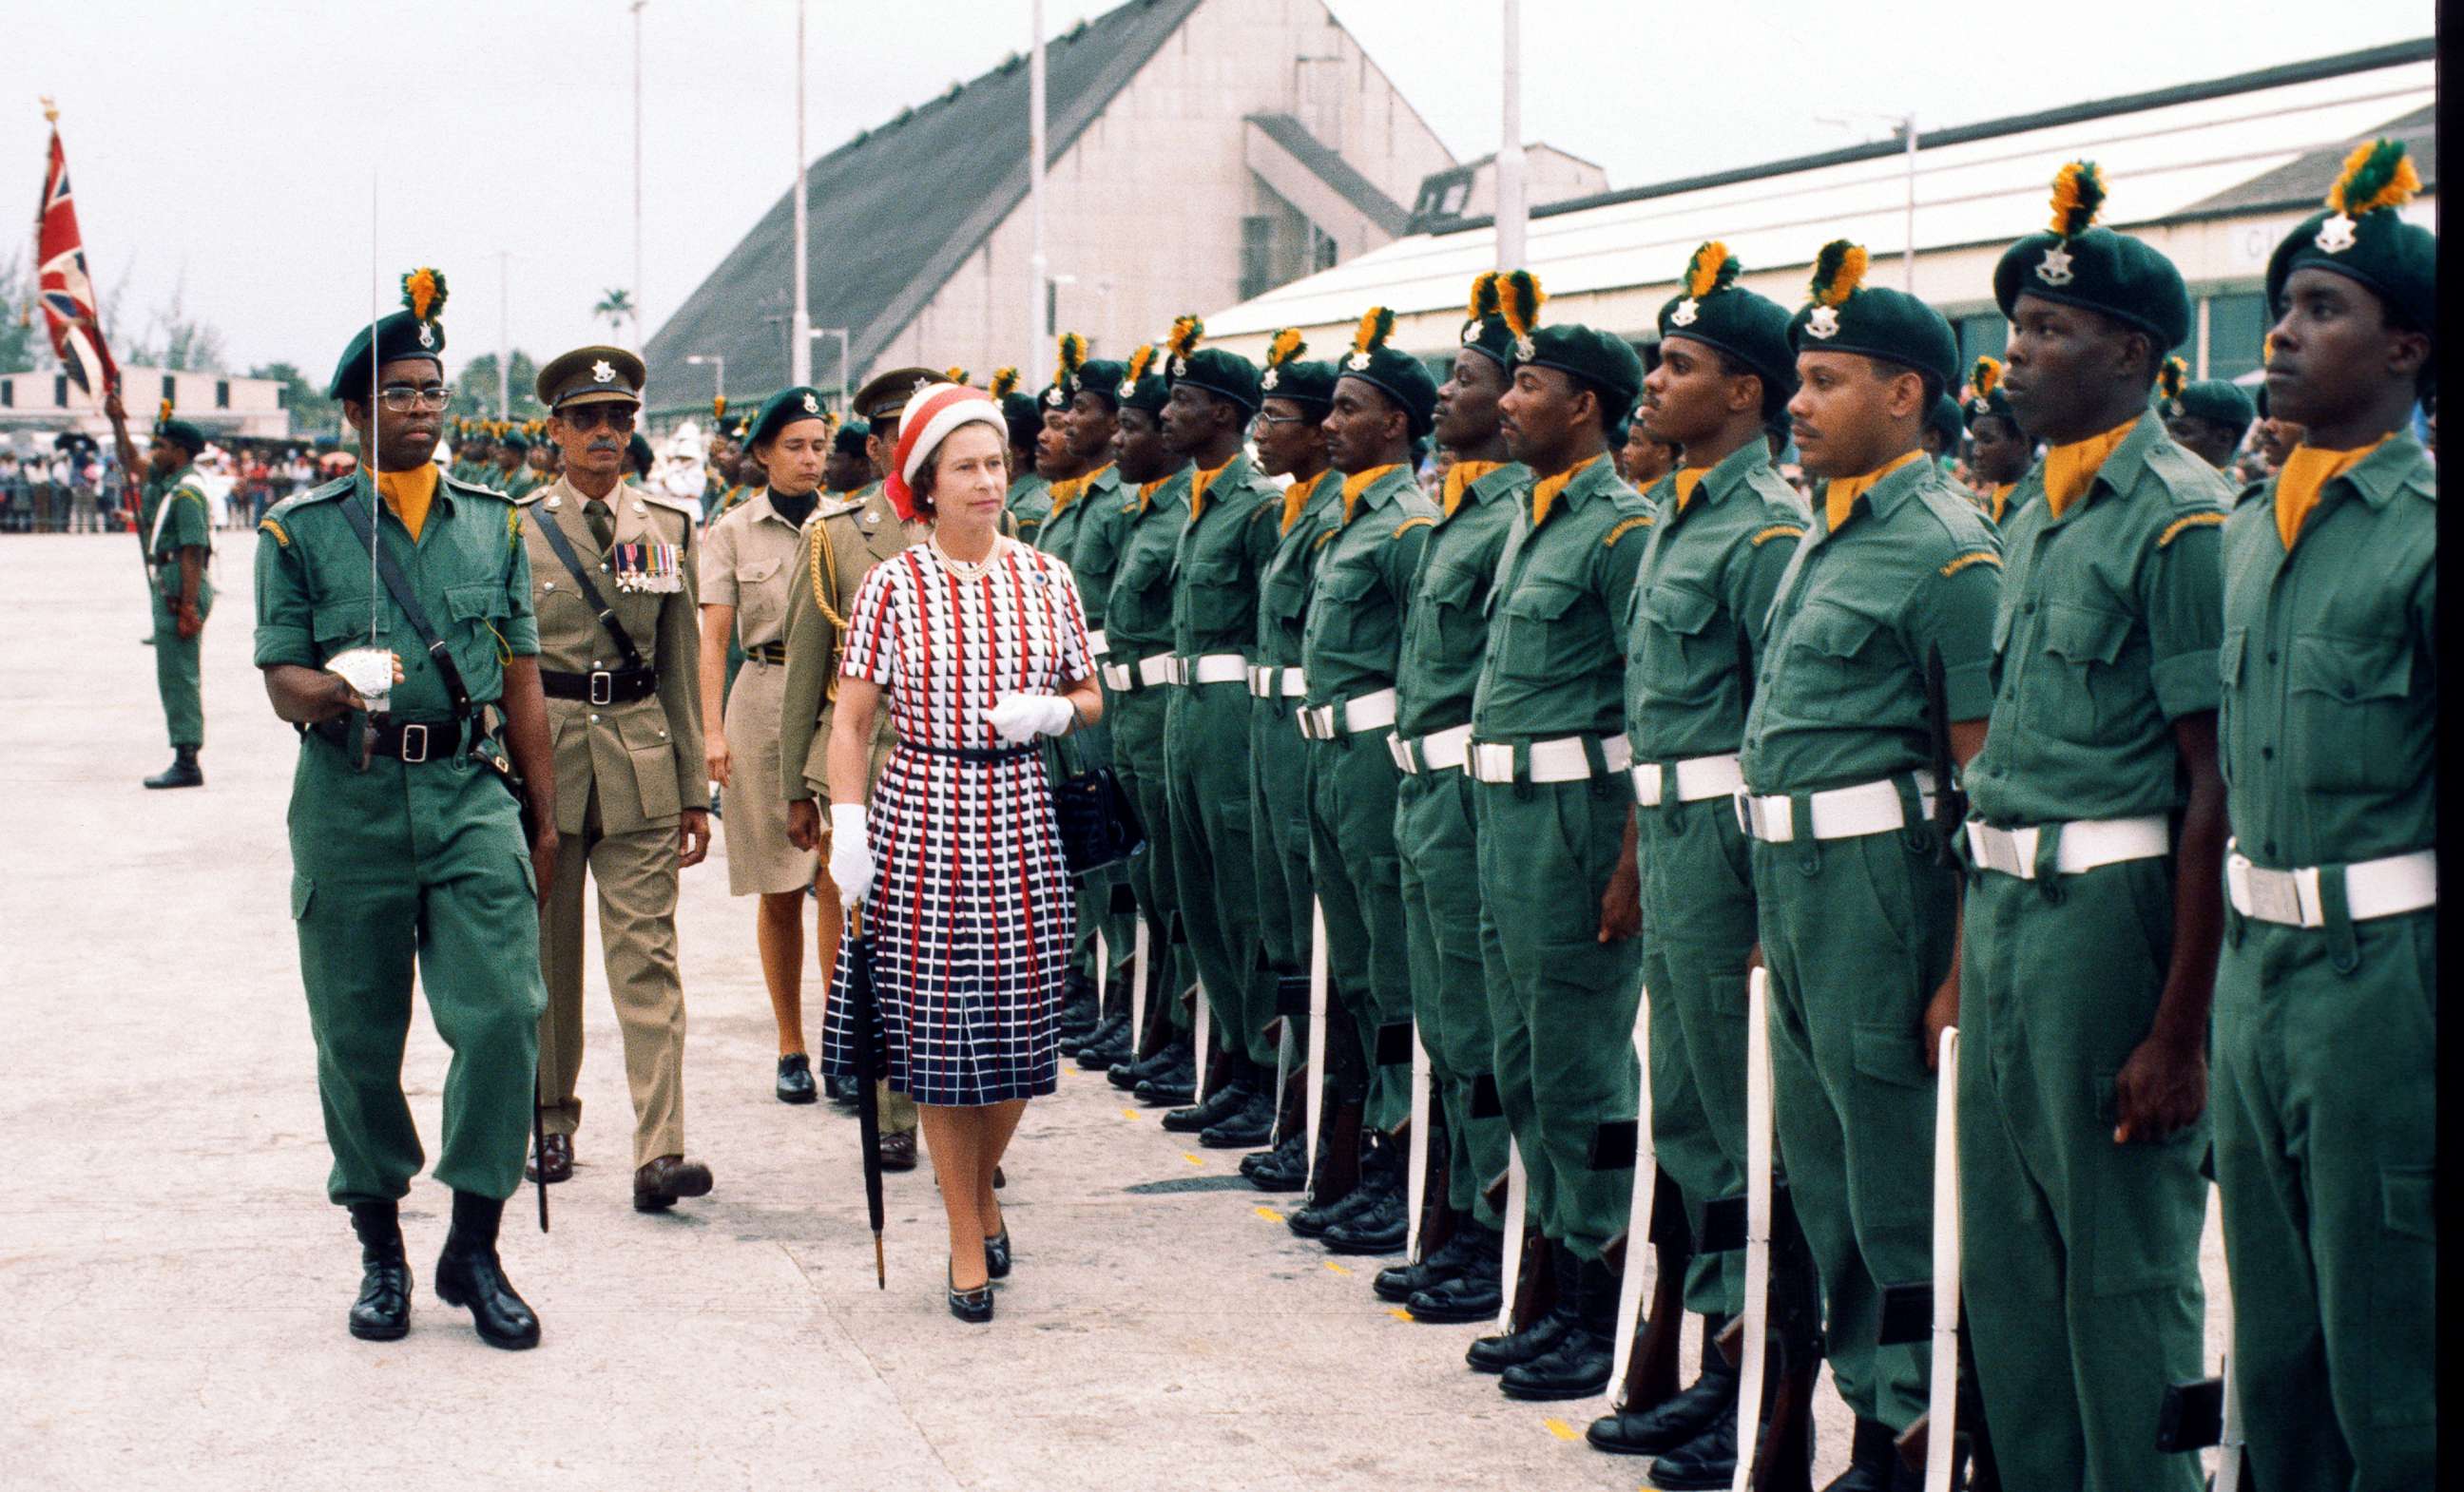 PHOTO: Queen Elizabeth ll inspects a guard of honour as she arrives in Barbados, Oct. 31, 1977.